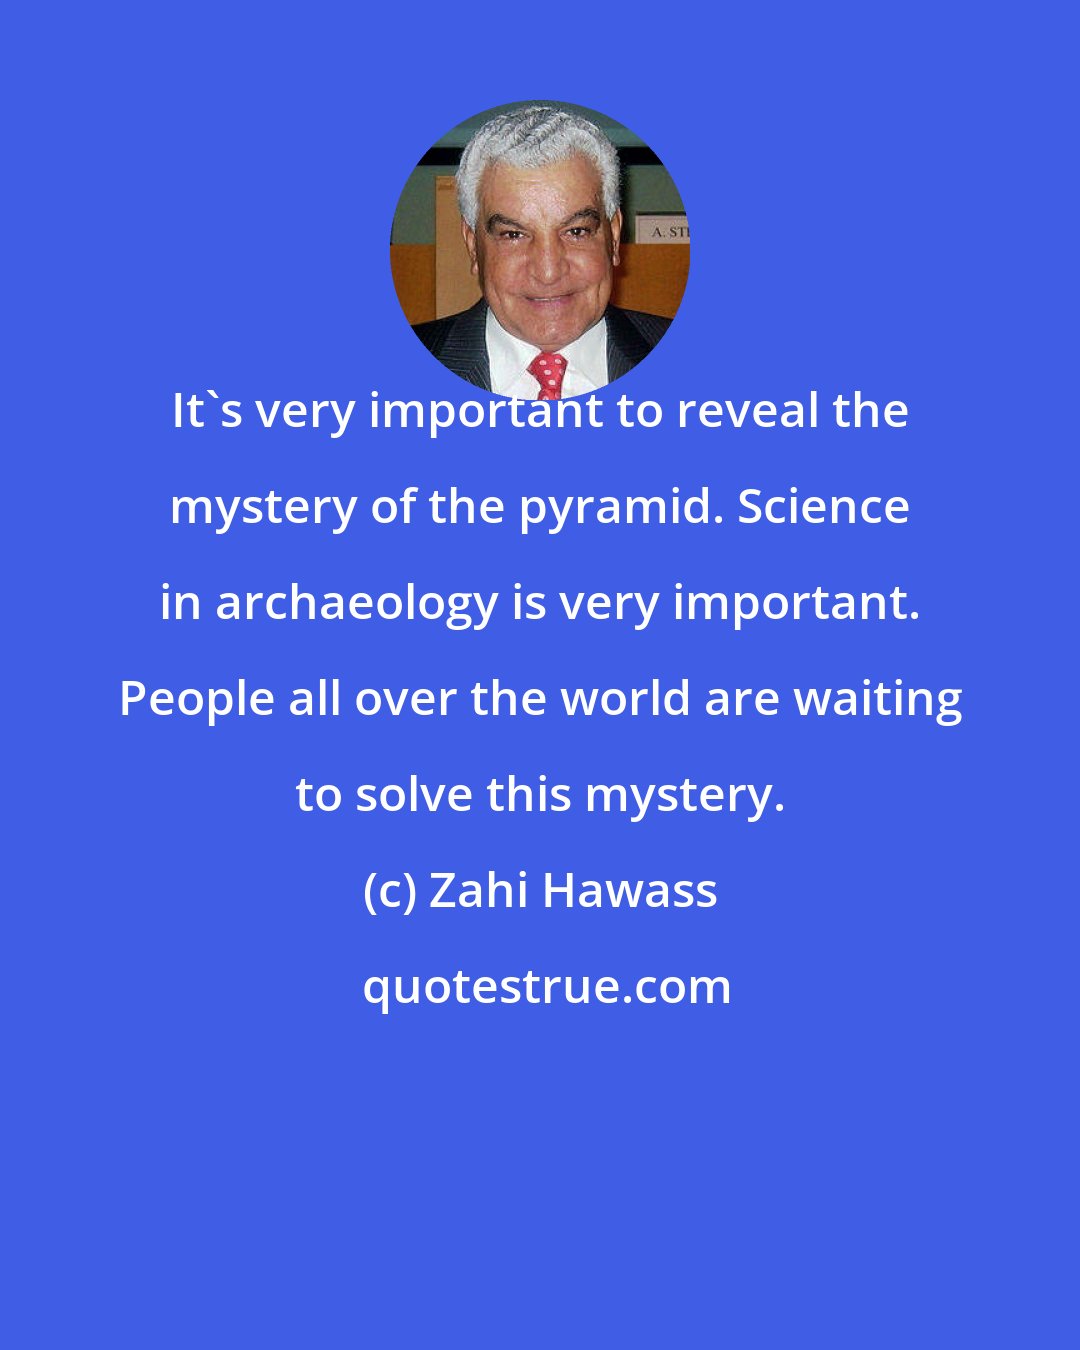 Zahi Hawass: It's very important to reveal the mystery of the pyramid. Science in archaeology is very important. People all over the world are waiting to solve this mystery.